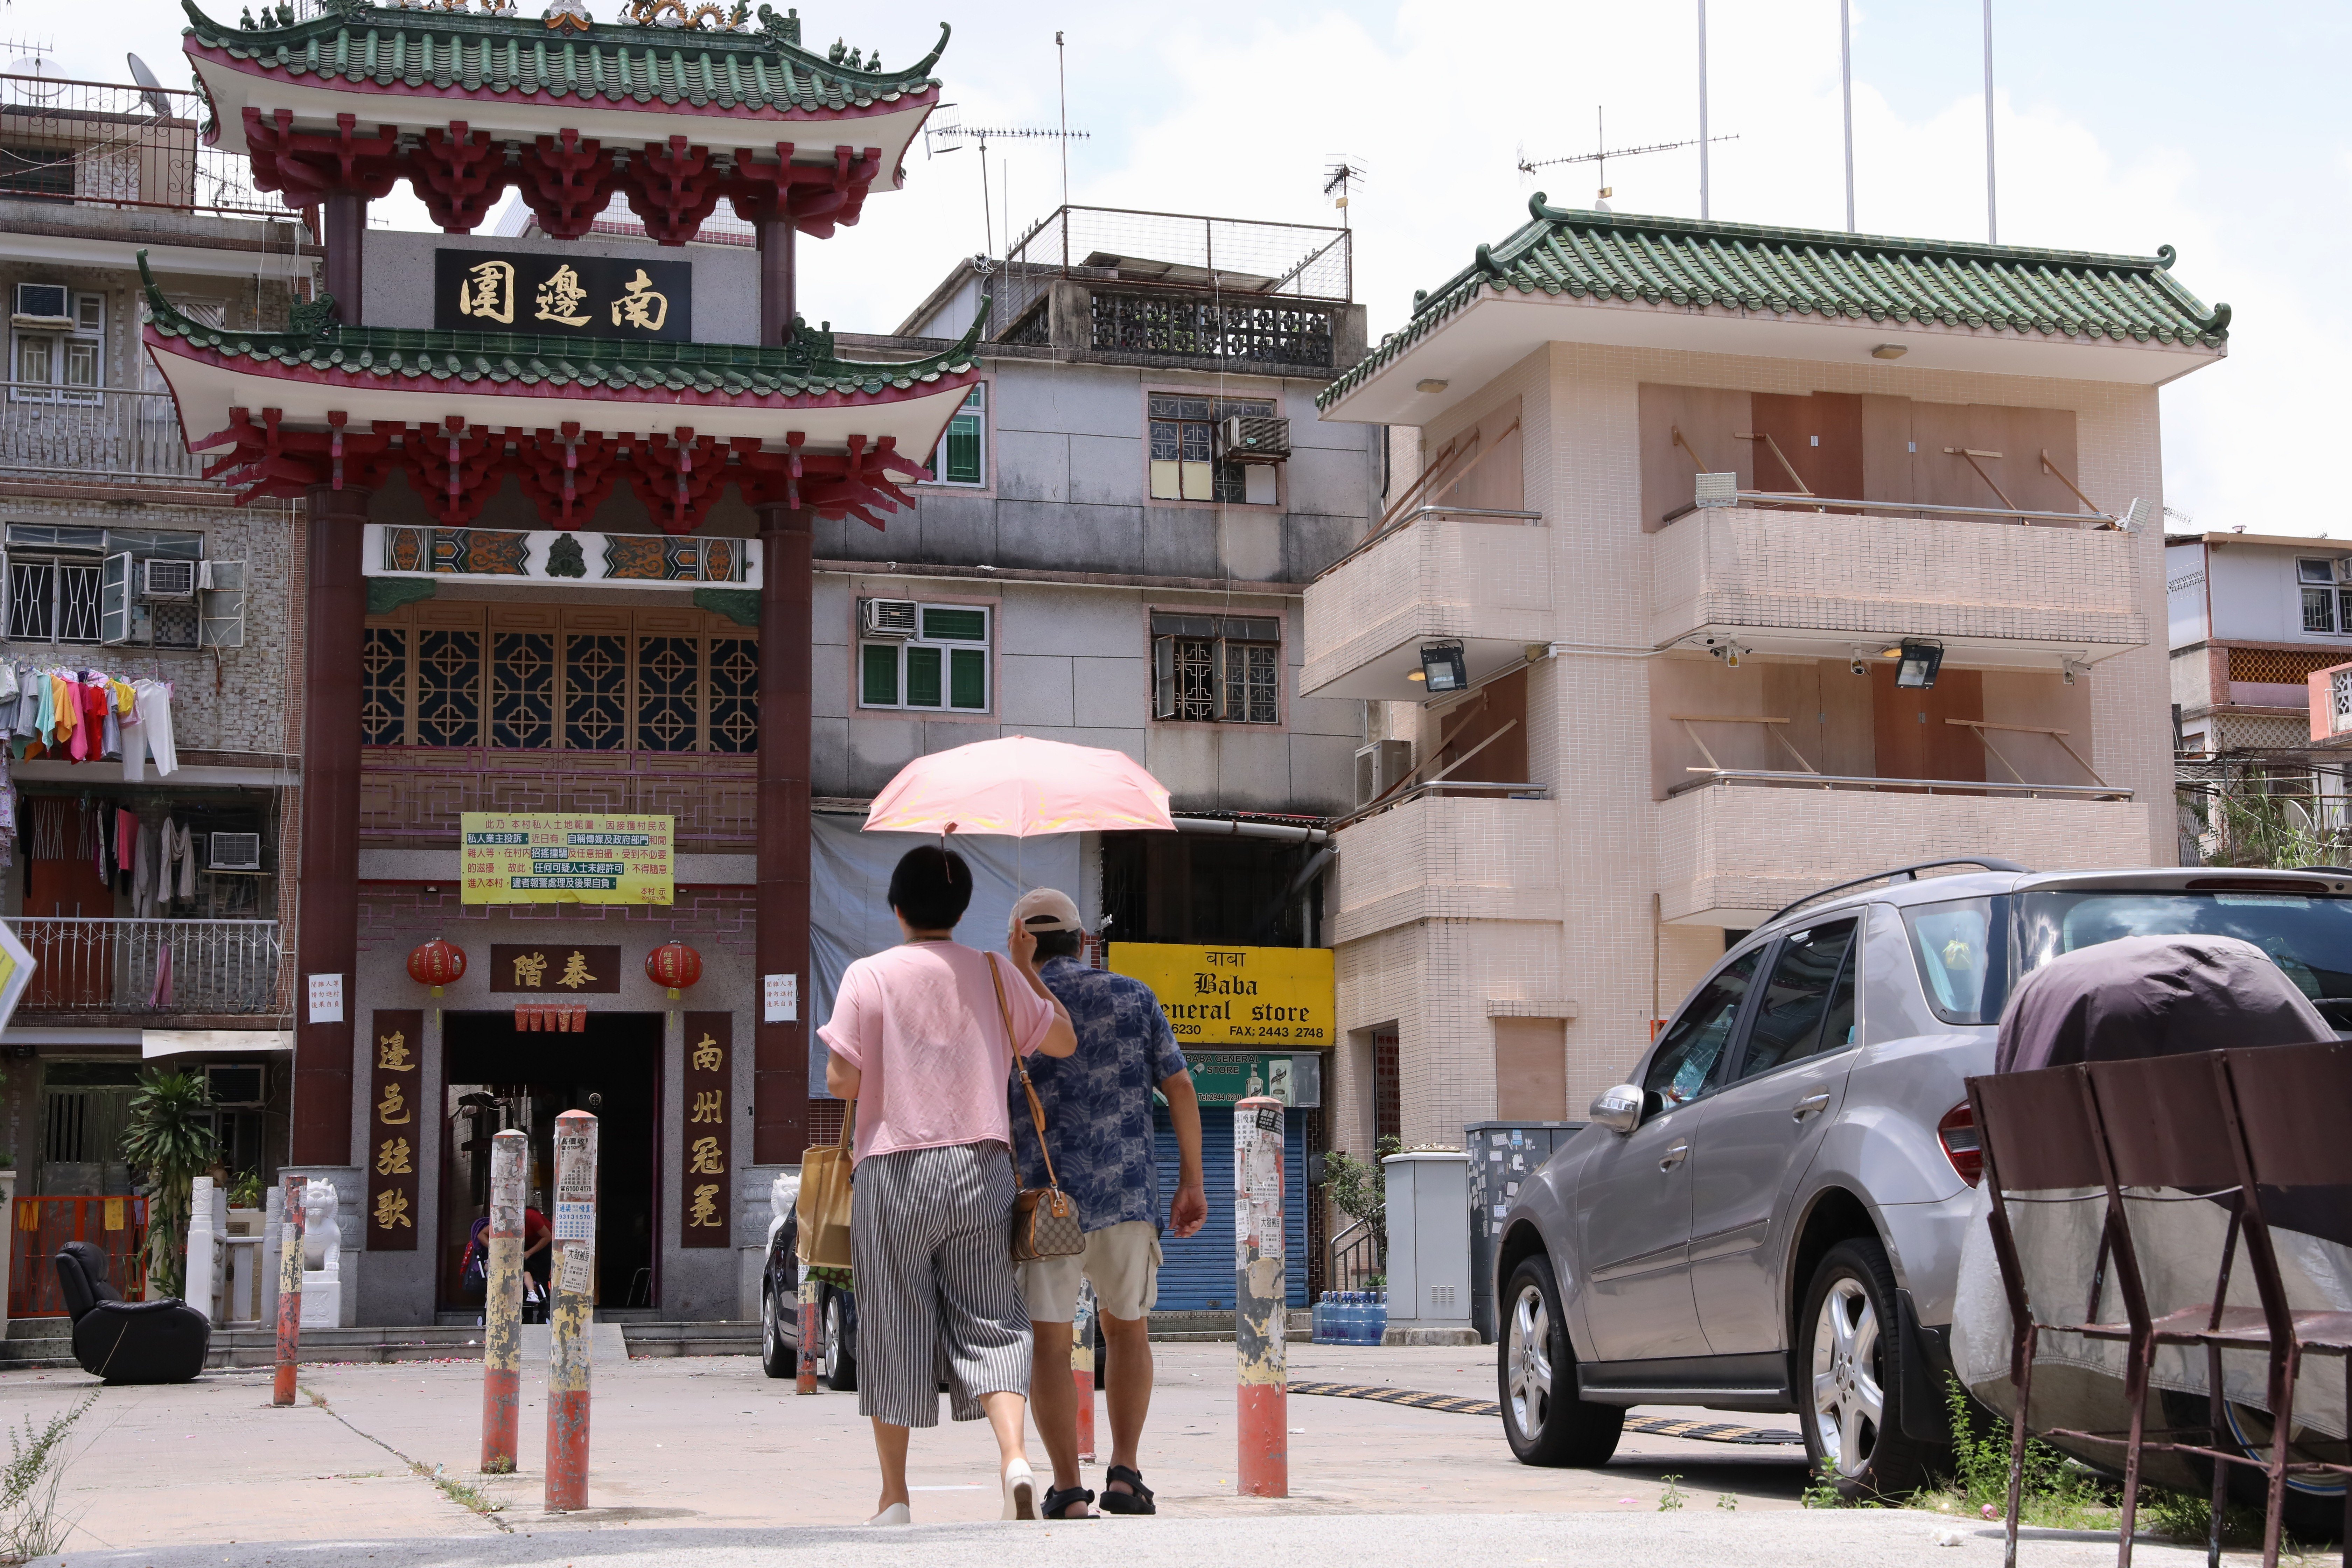 Nam Pin Wai was believed to be home to some of the men involved in Sunday’s attack. Photo: K.Y. Cheng